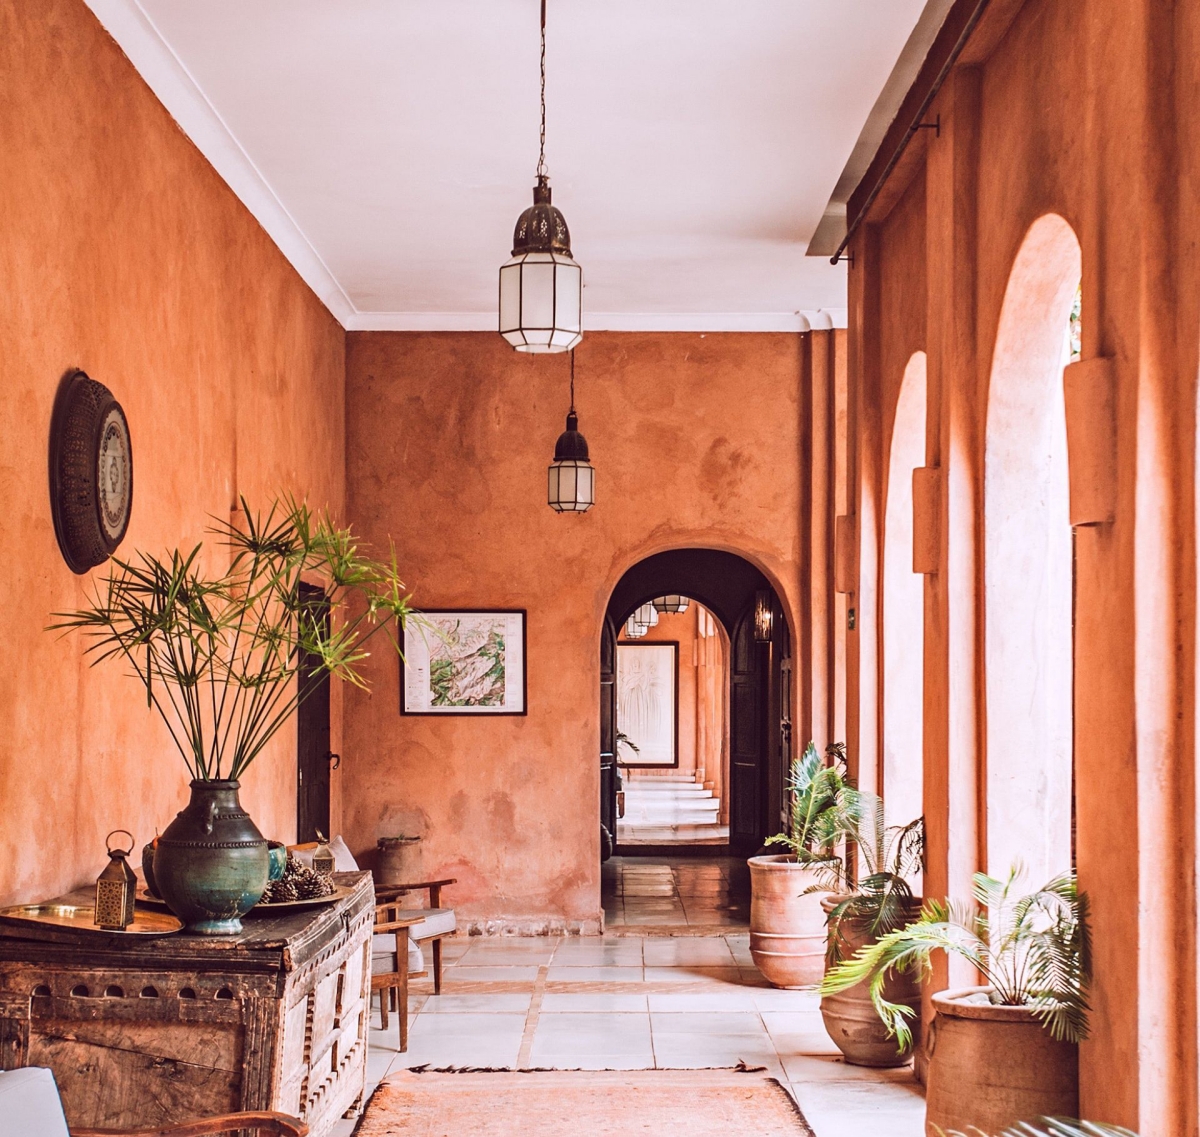 Spanish-Inspired Living: The Beauty of a Spanish Style Home